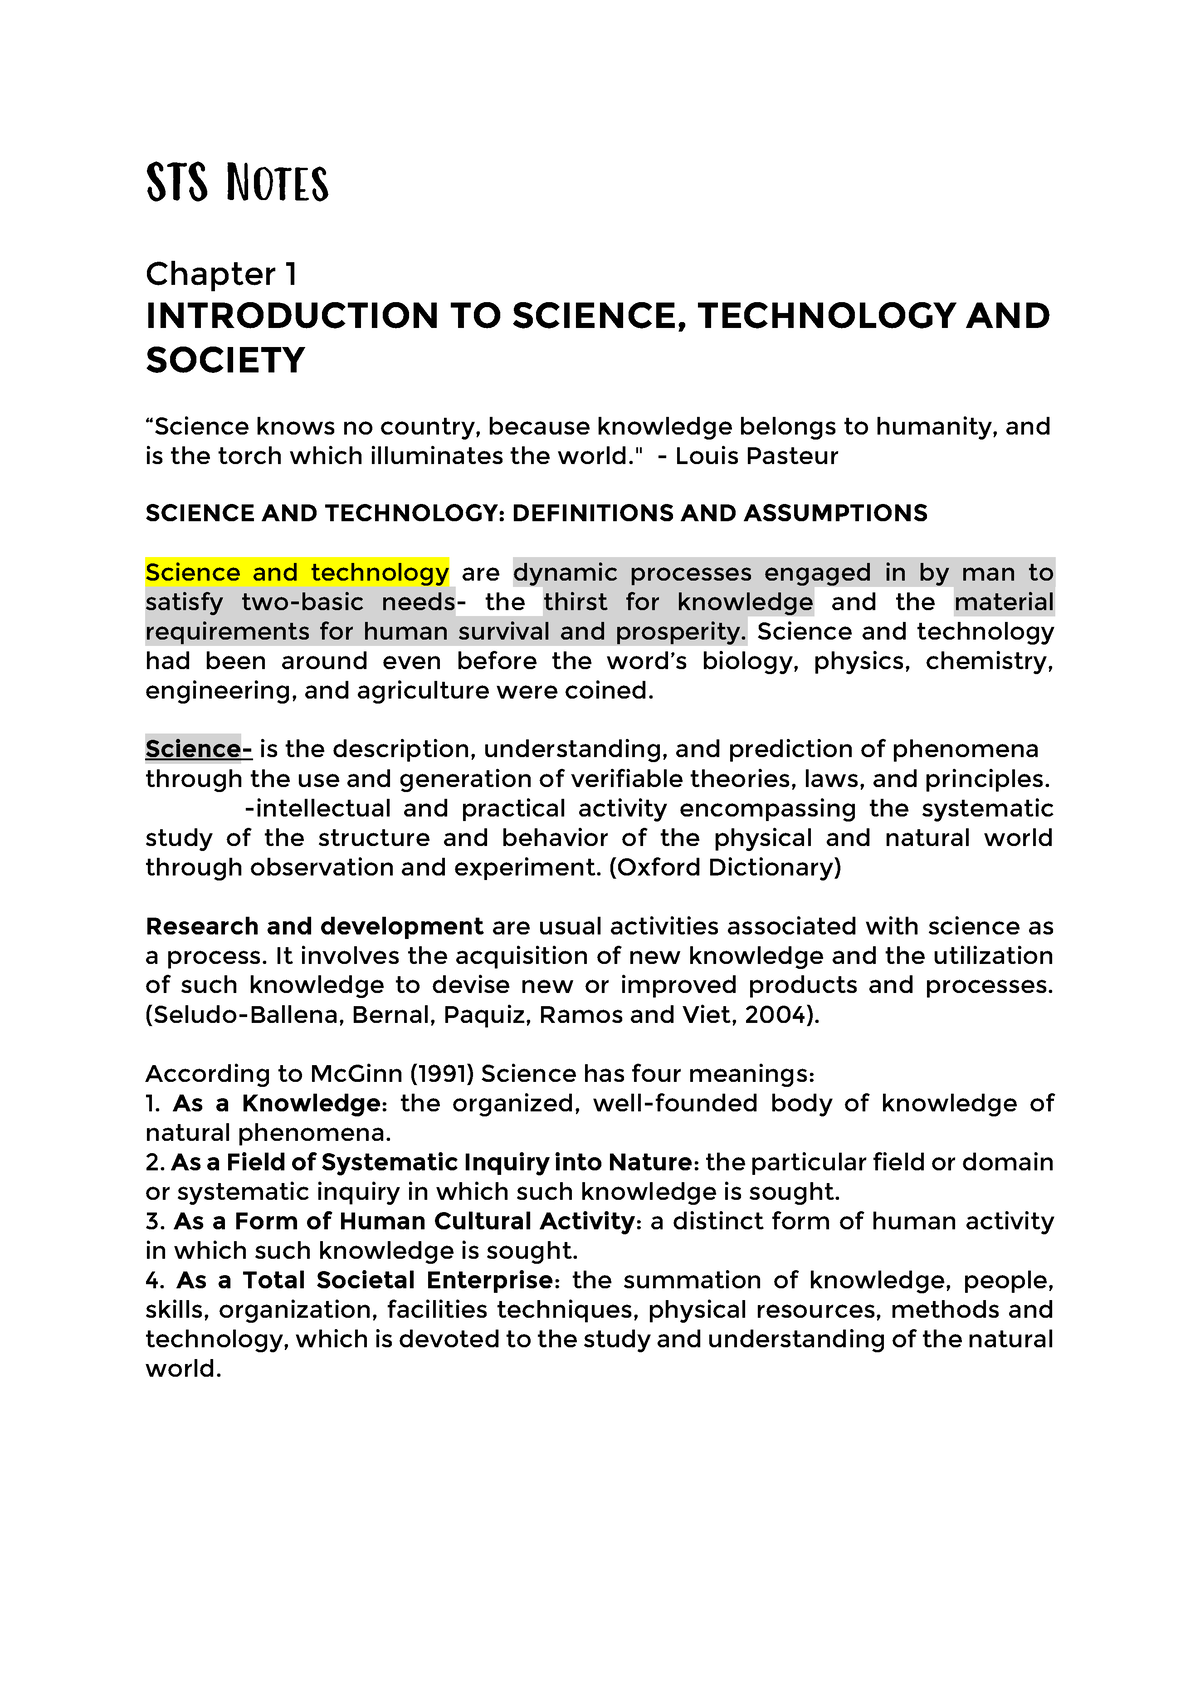 thesis about science and technology